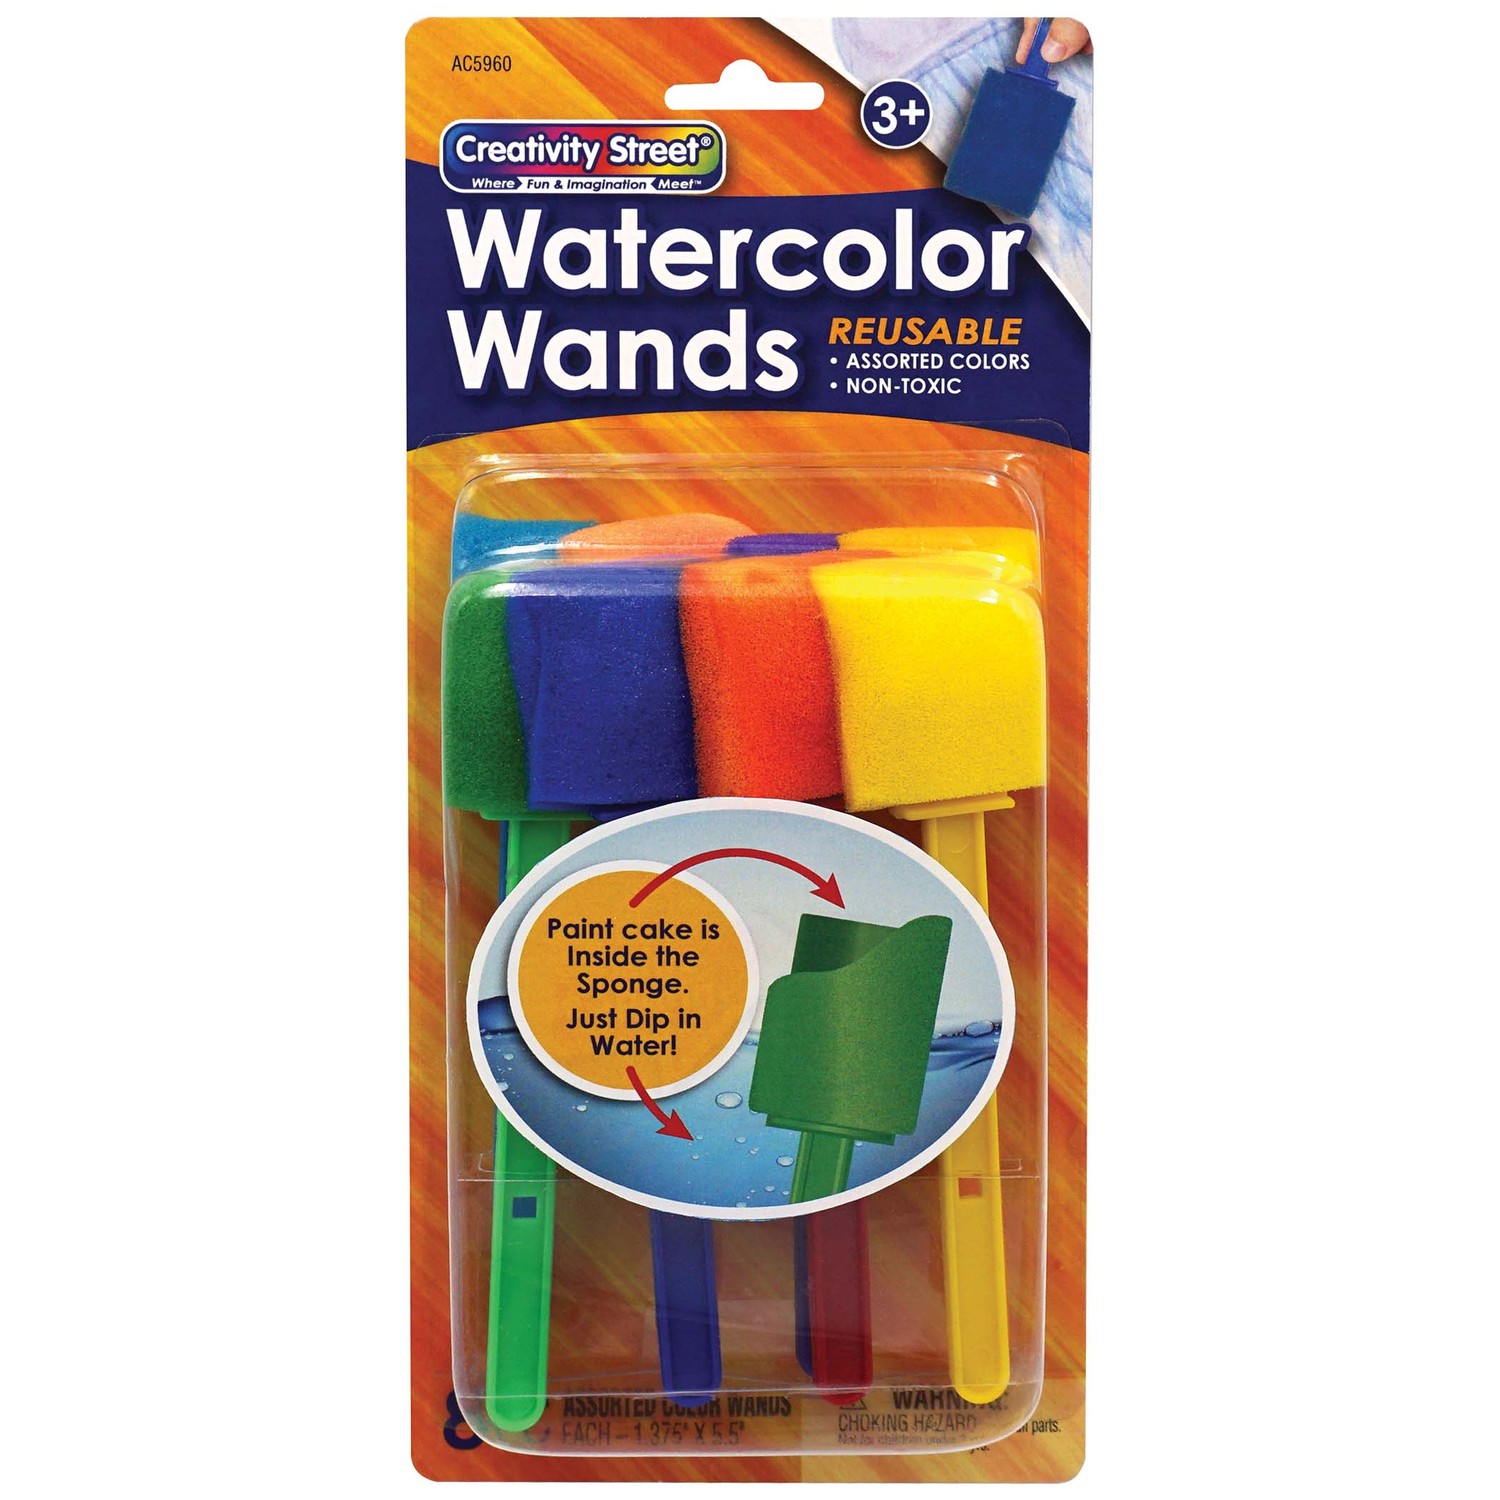 Watercolor Wands with Paint, 8 Assorted Colors, 1-3/8" x 5-1/2", 8 Wands